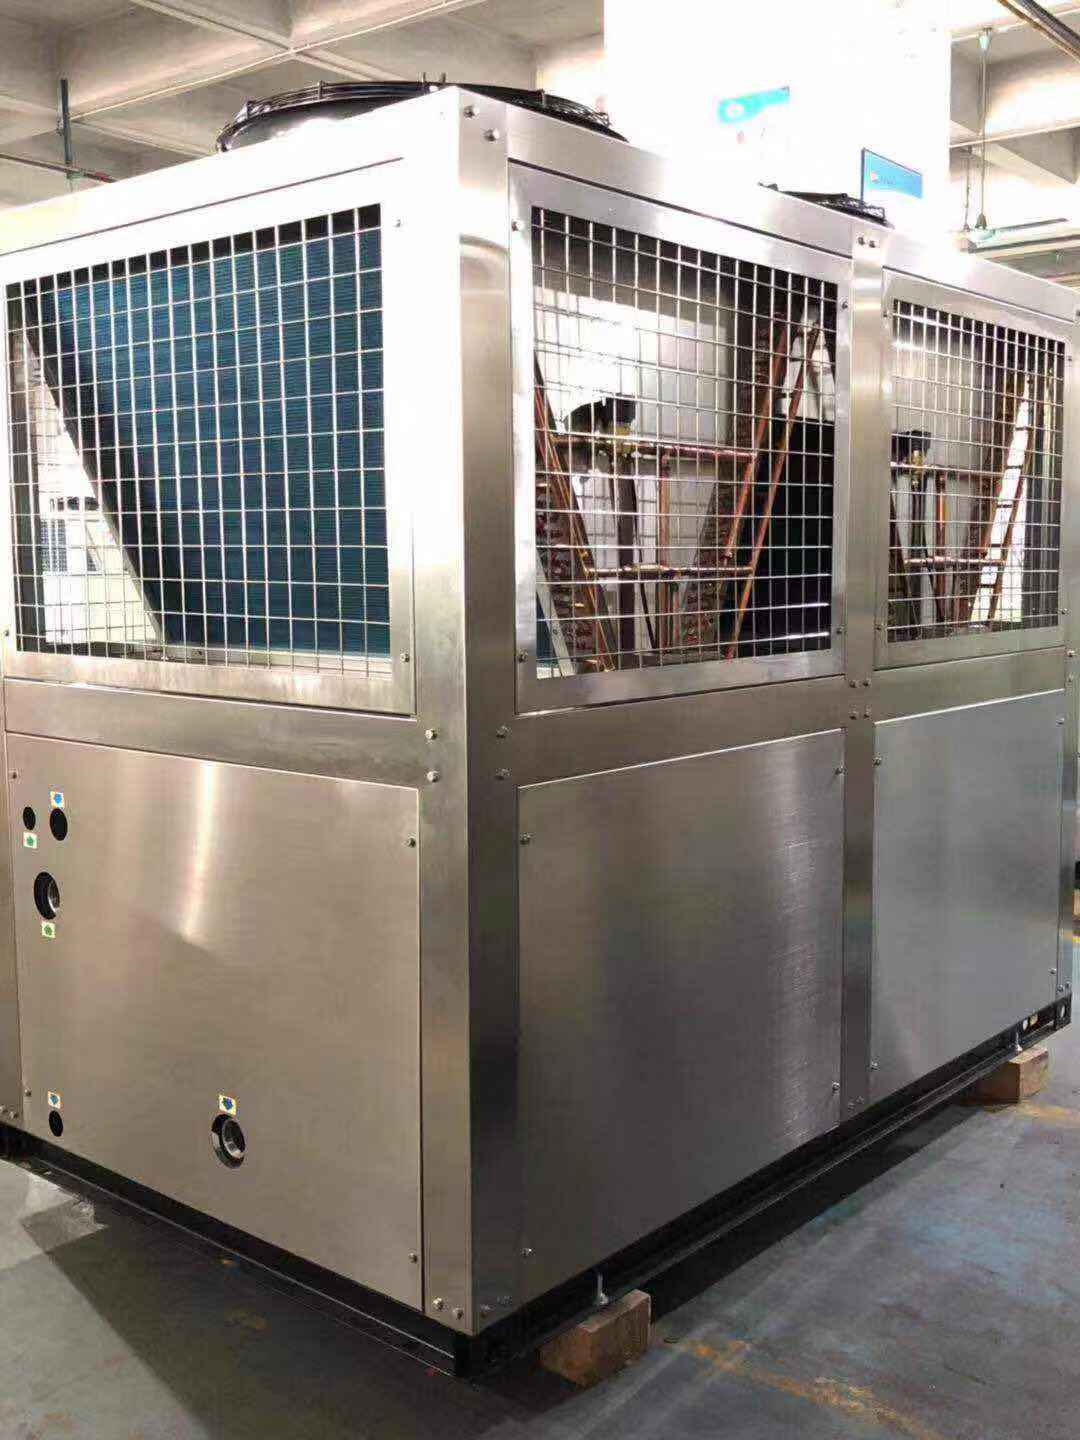 Stainless Steel Air Cooled Chiller Unit